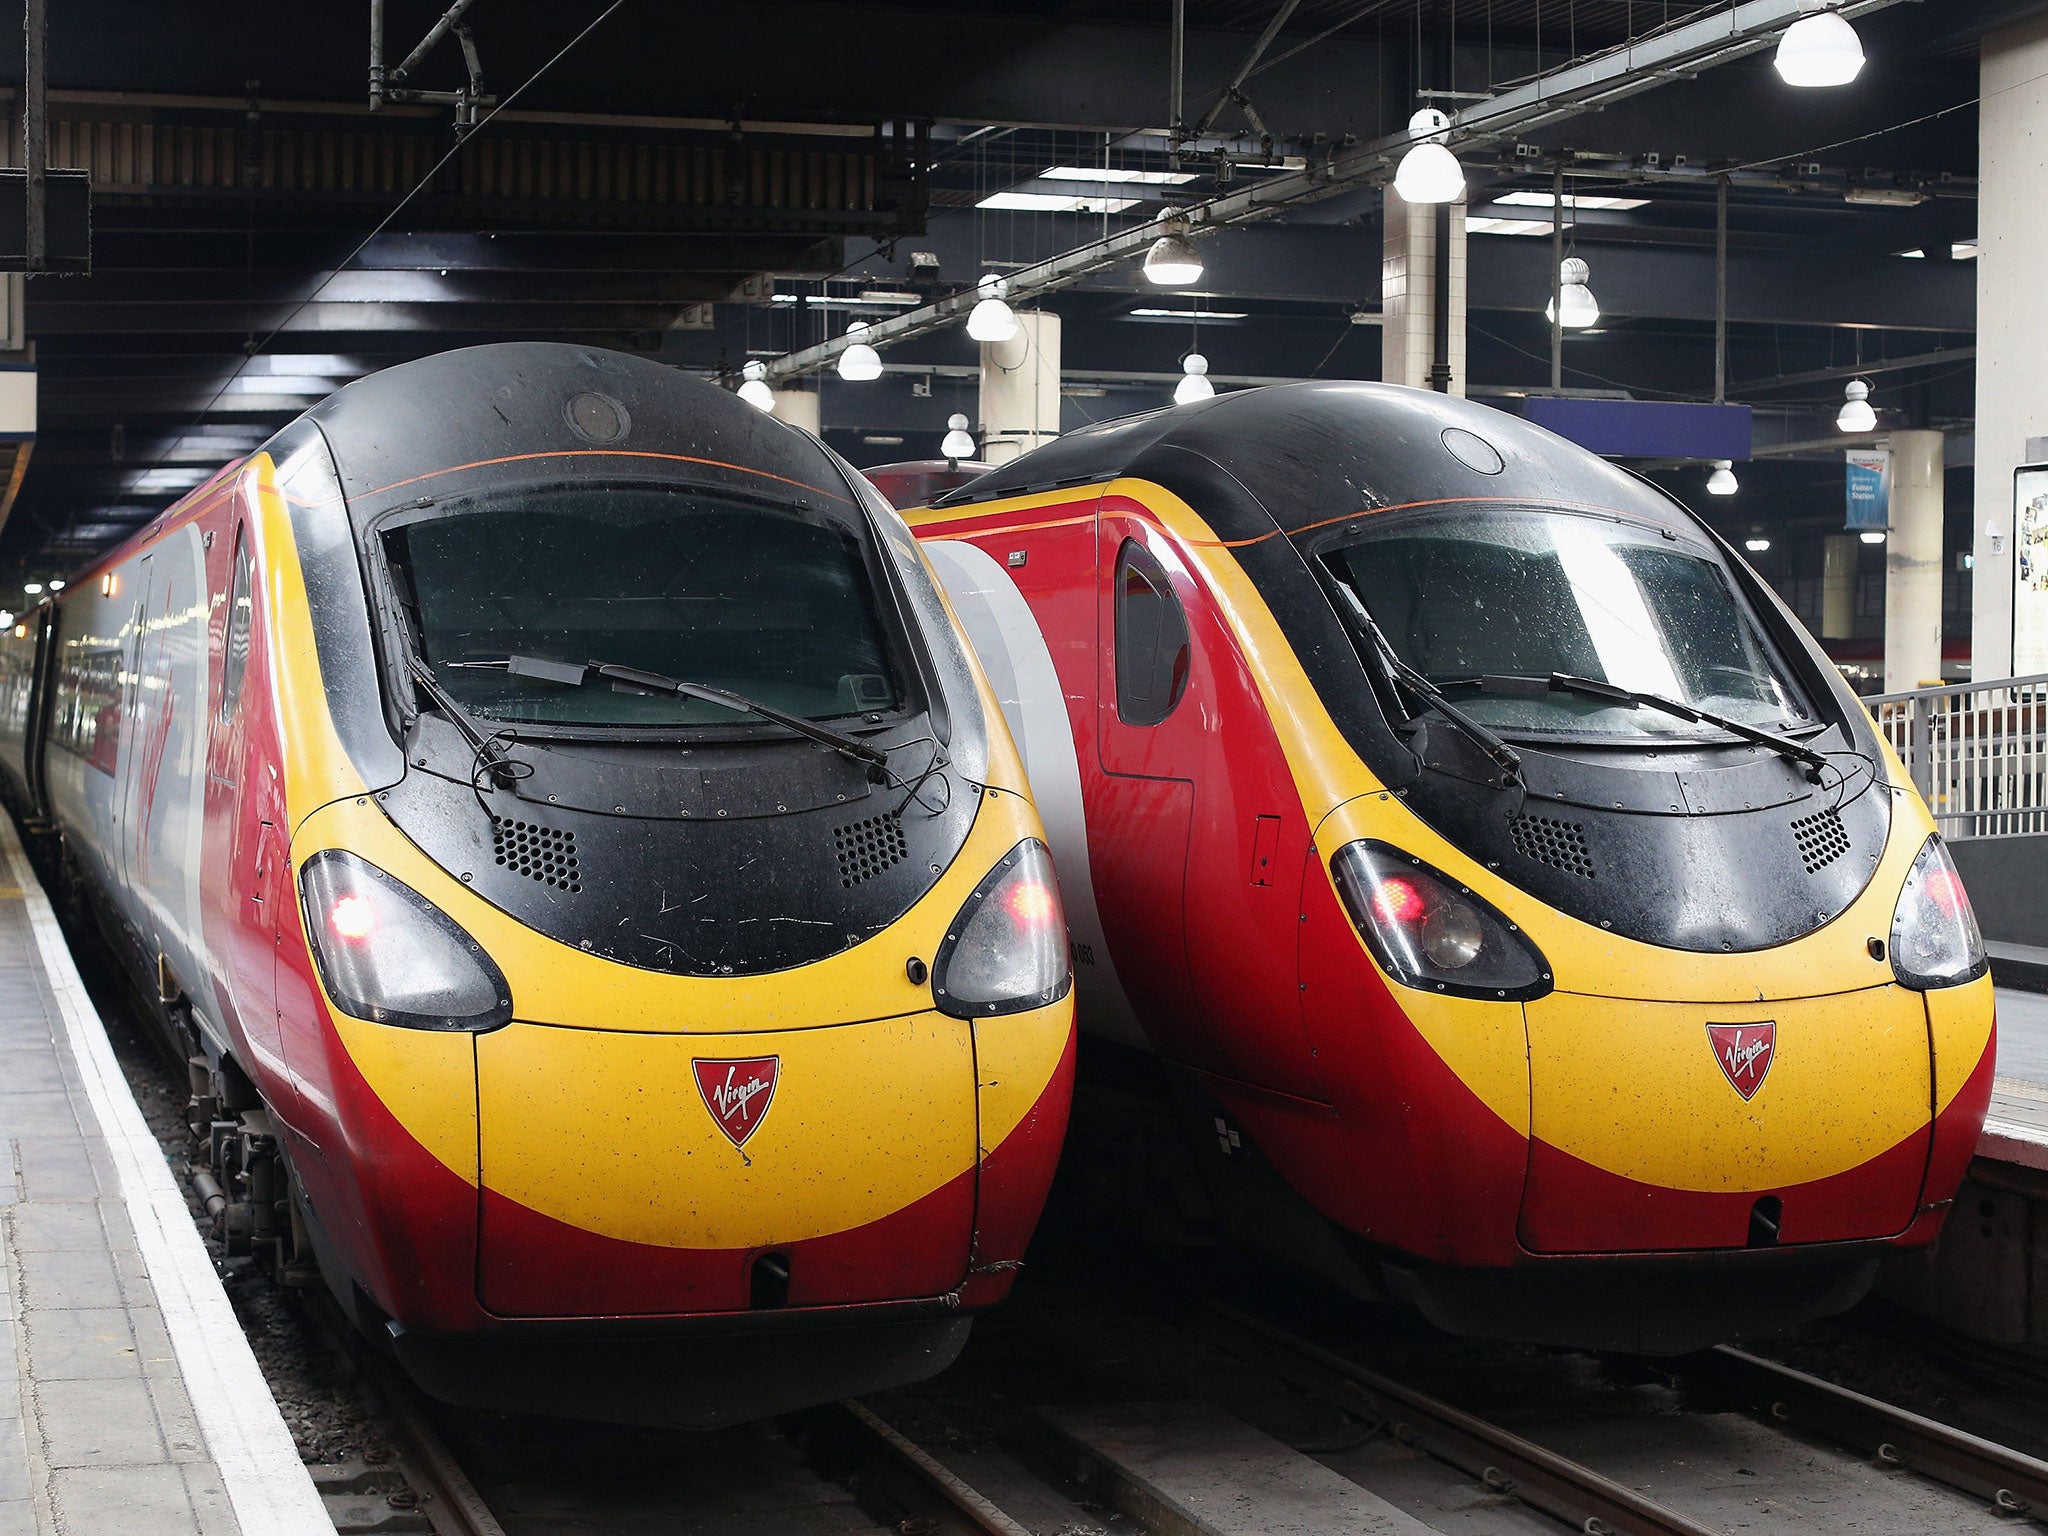 Virgin Trains was at the centre of an overcrowding row this week after accusations levelled by Labour leader Jeremy Corbyn